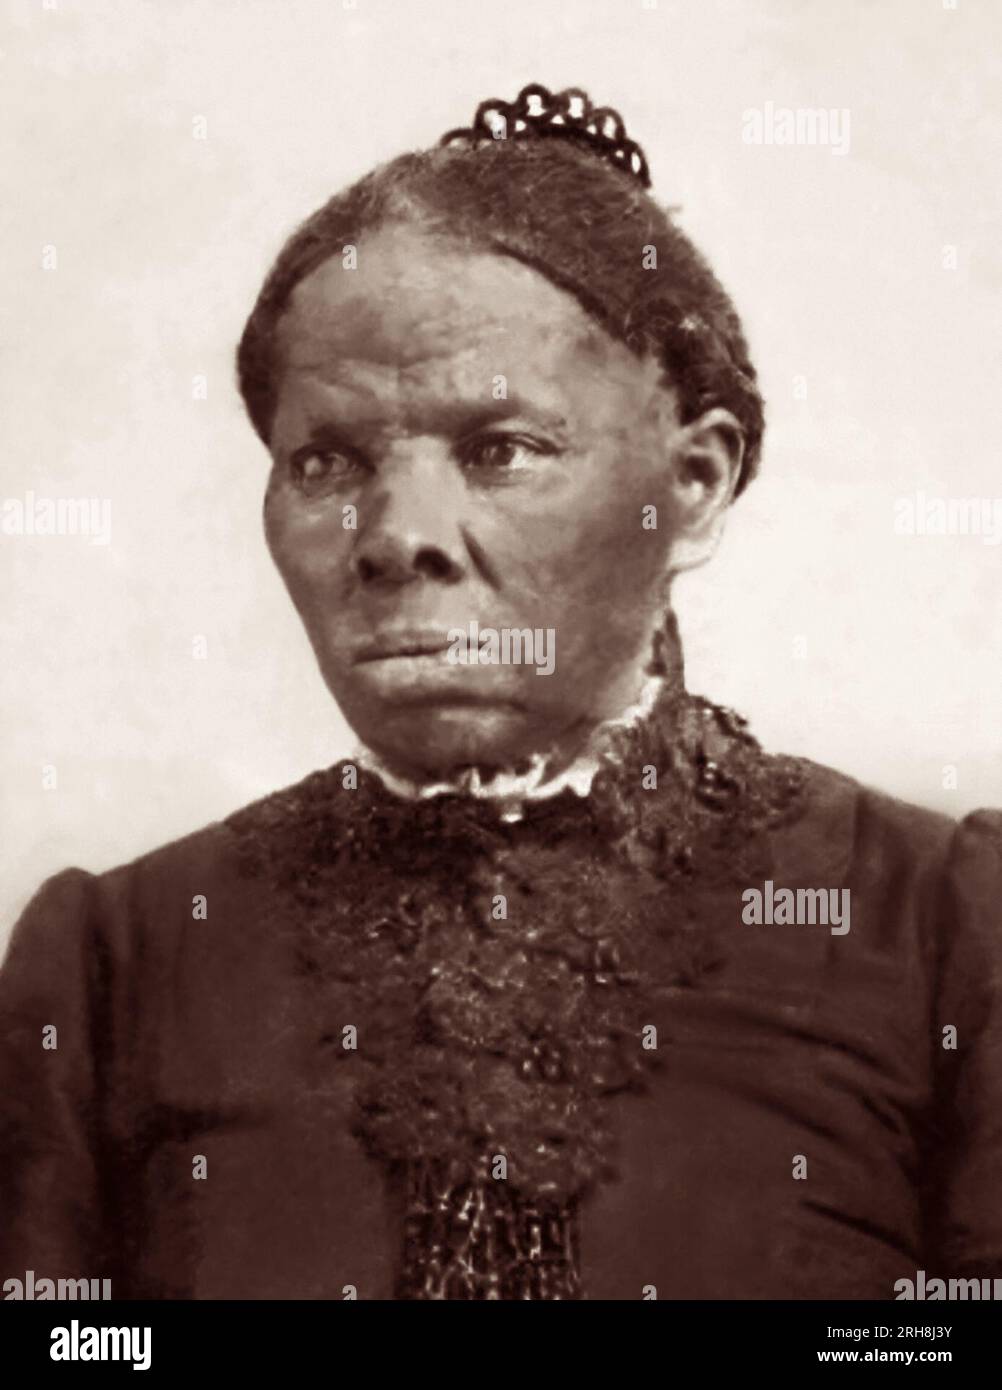 Harriet Tubman (1822-1913), American abolitionist and former slave who ...